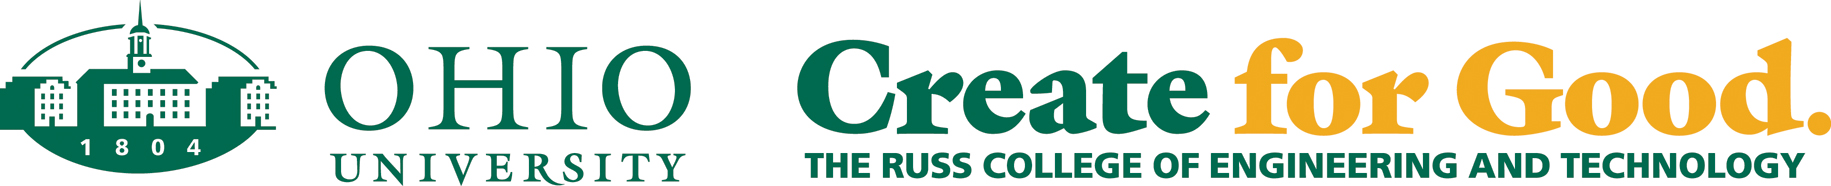 Russ College of Engineering and Technology, Ohio University 